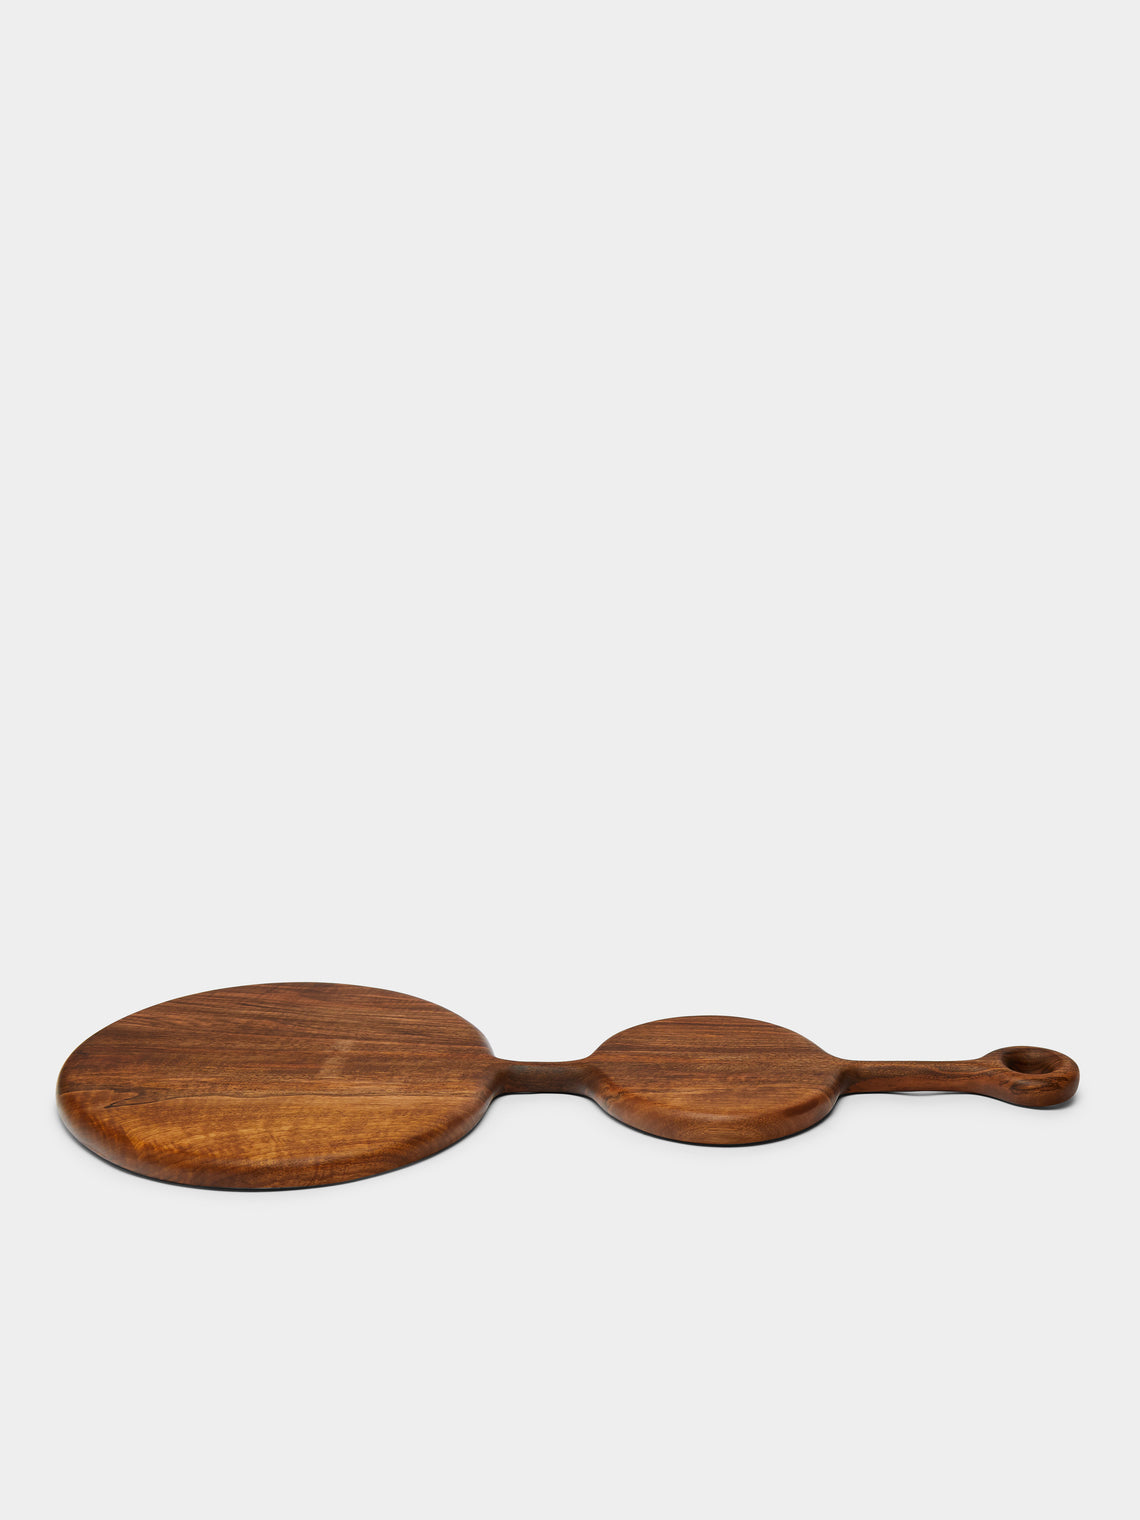 Lucas Castex - No. 2 Hand-Carved Oiled Walnut Serving Board -  - ABASK